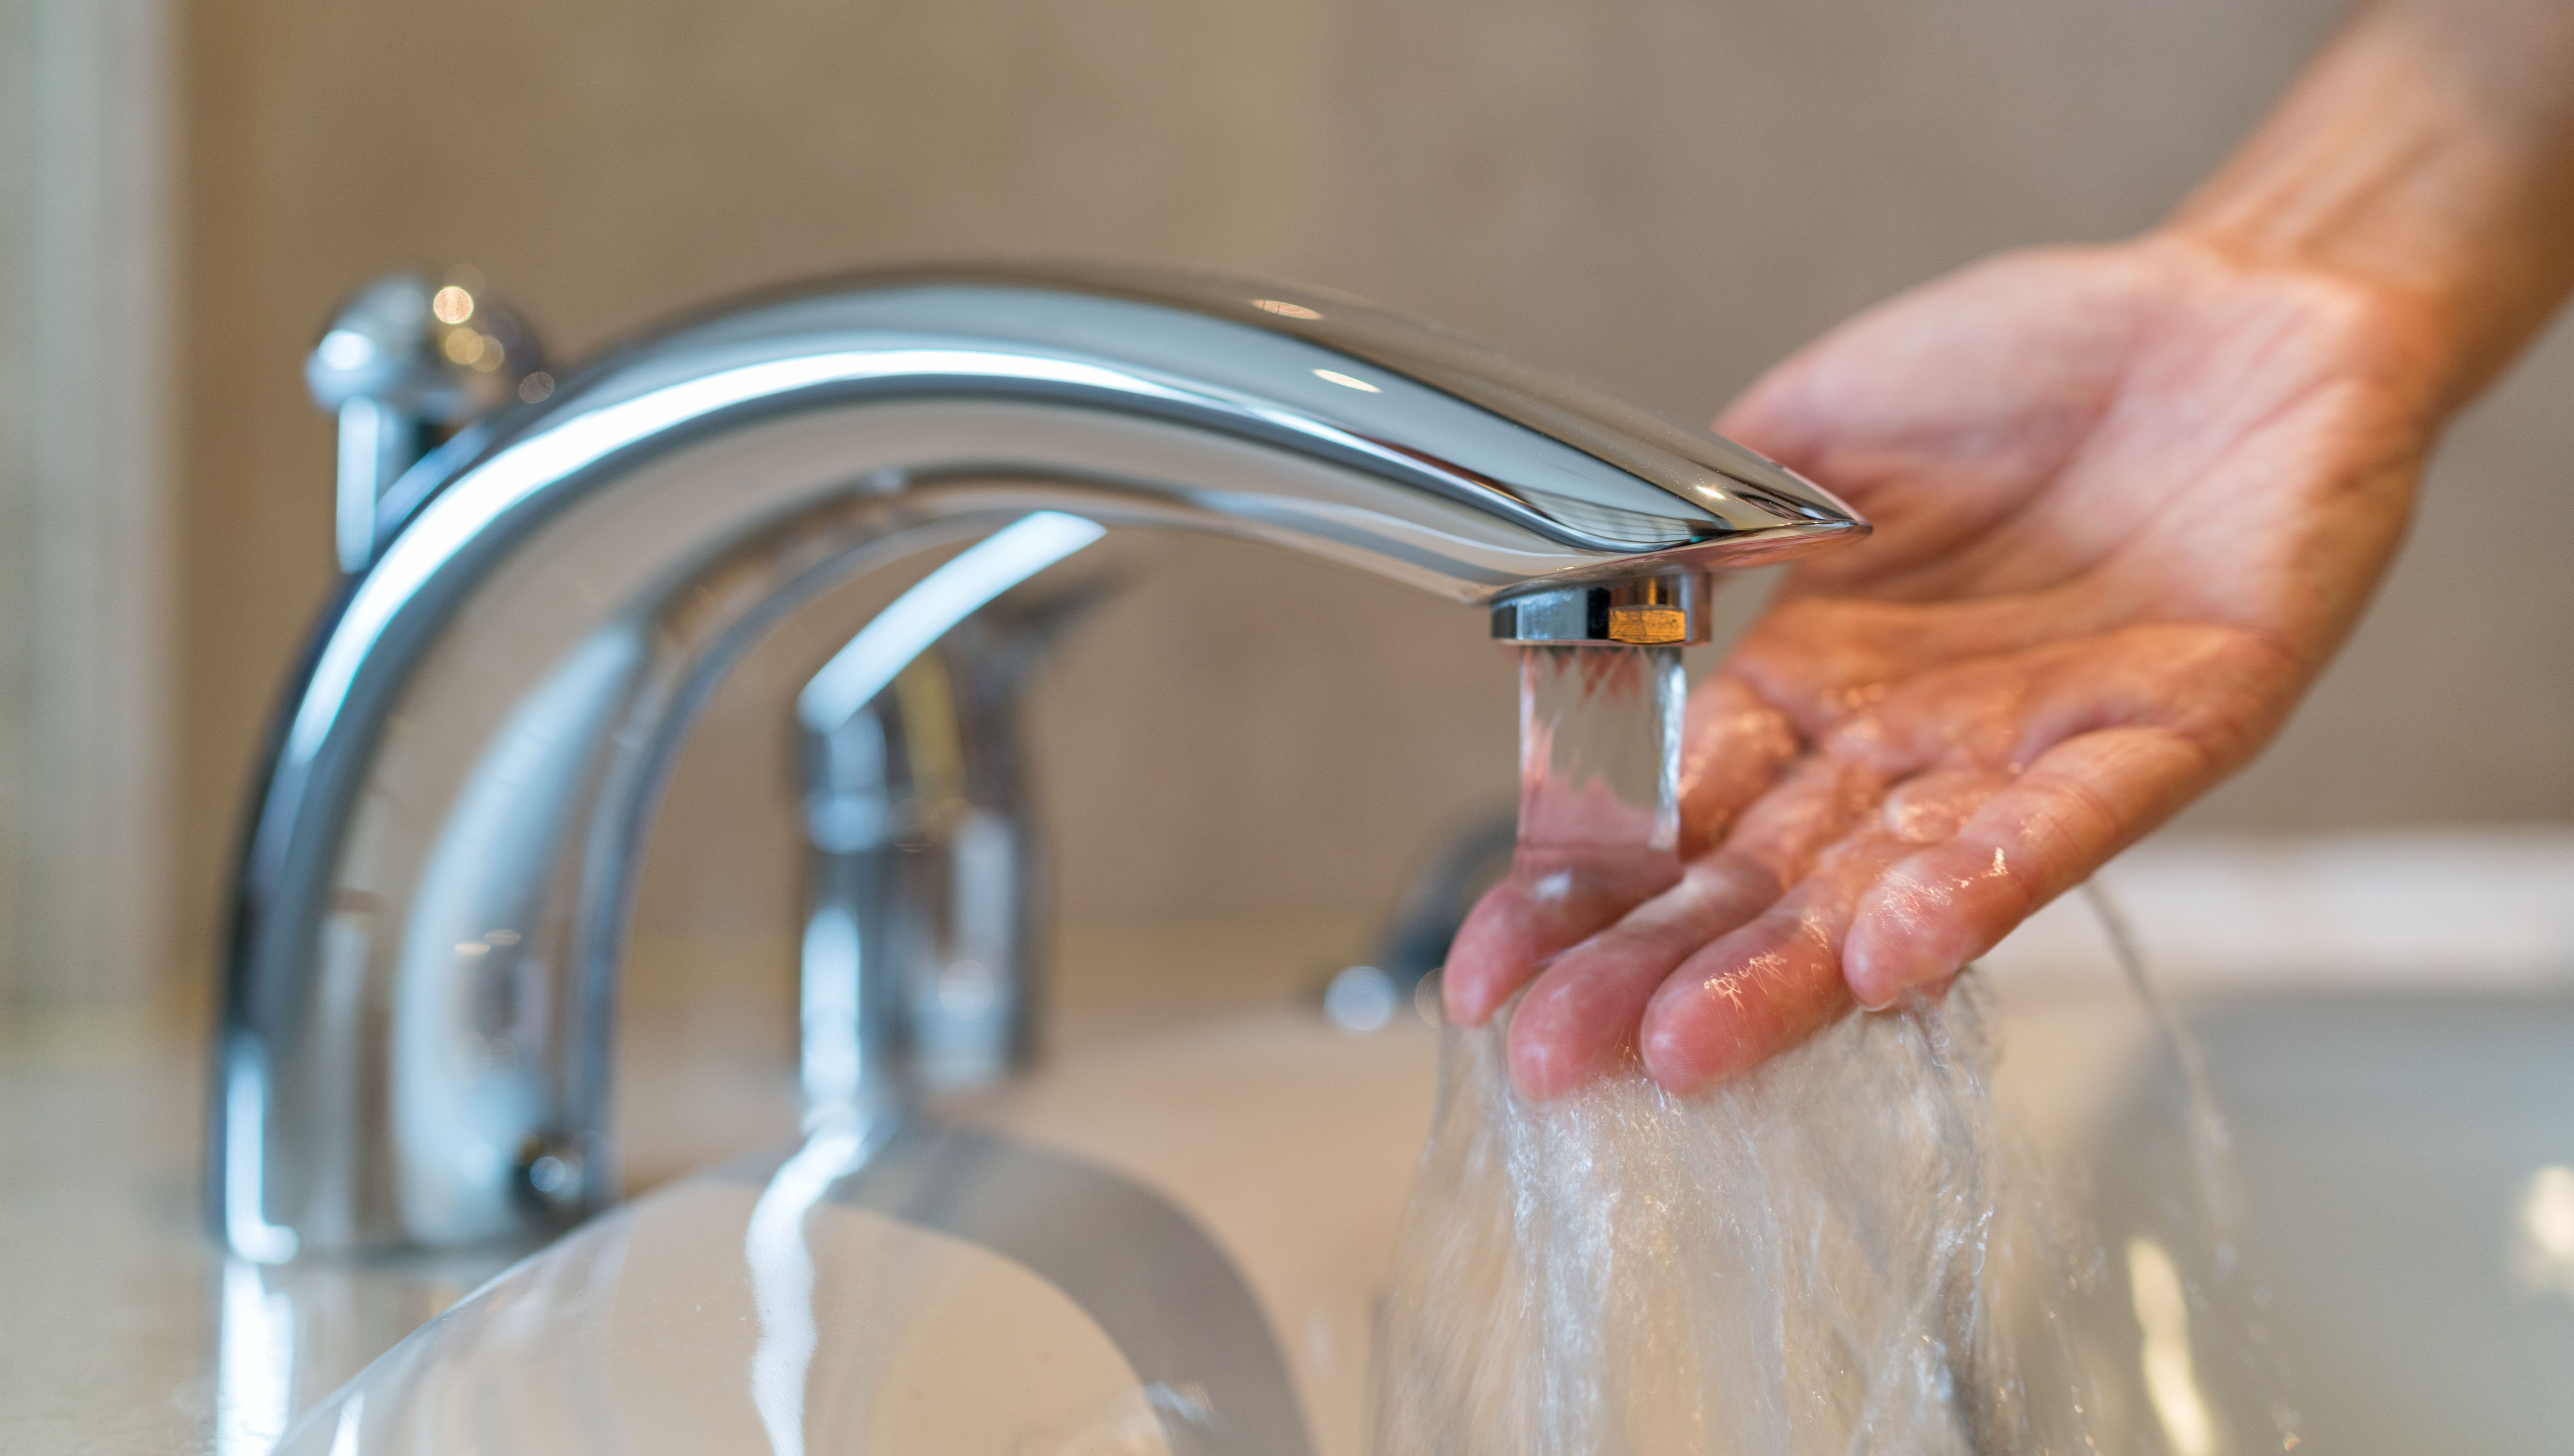 Hand washing in hot water from bathroom faucet